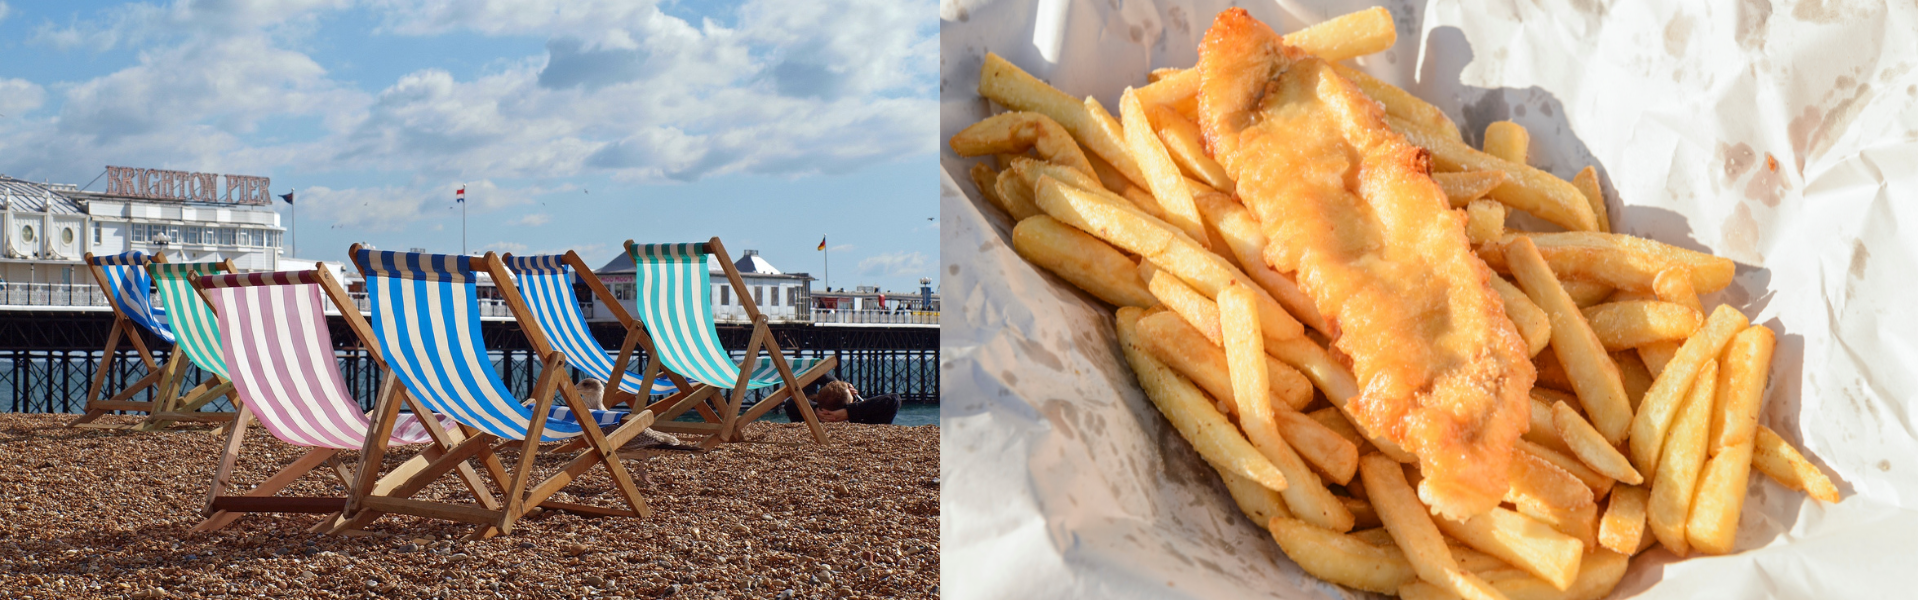 A collage of two images, one of Brighton beach with empty deckchairs in the foreground and the pier in the background; the other image is of a takeaway portion of fish and chips